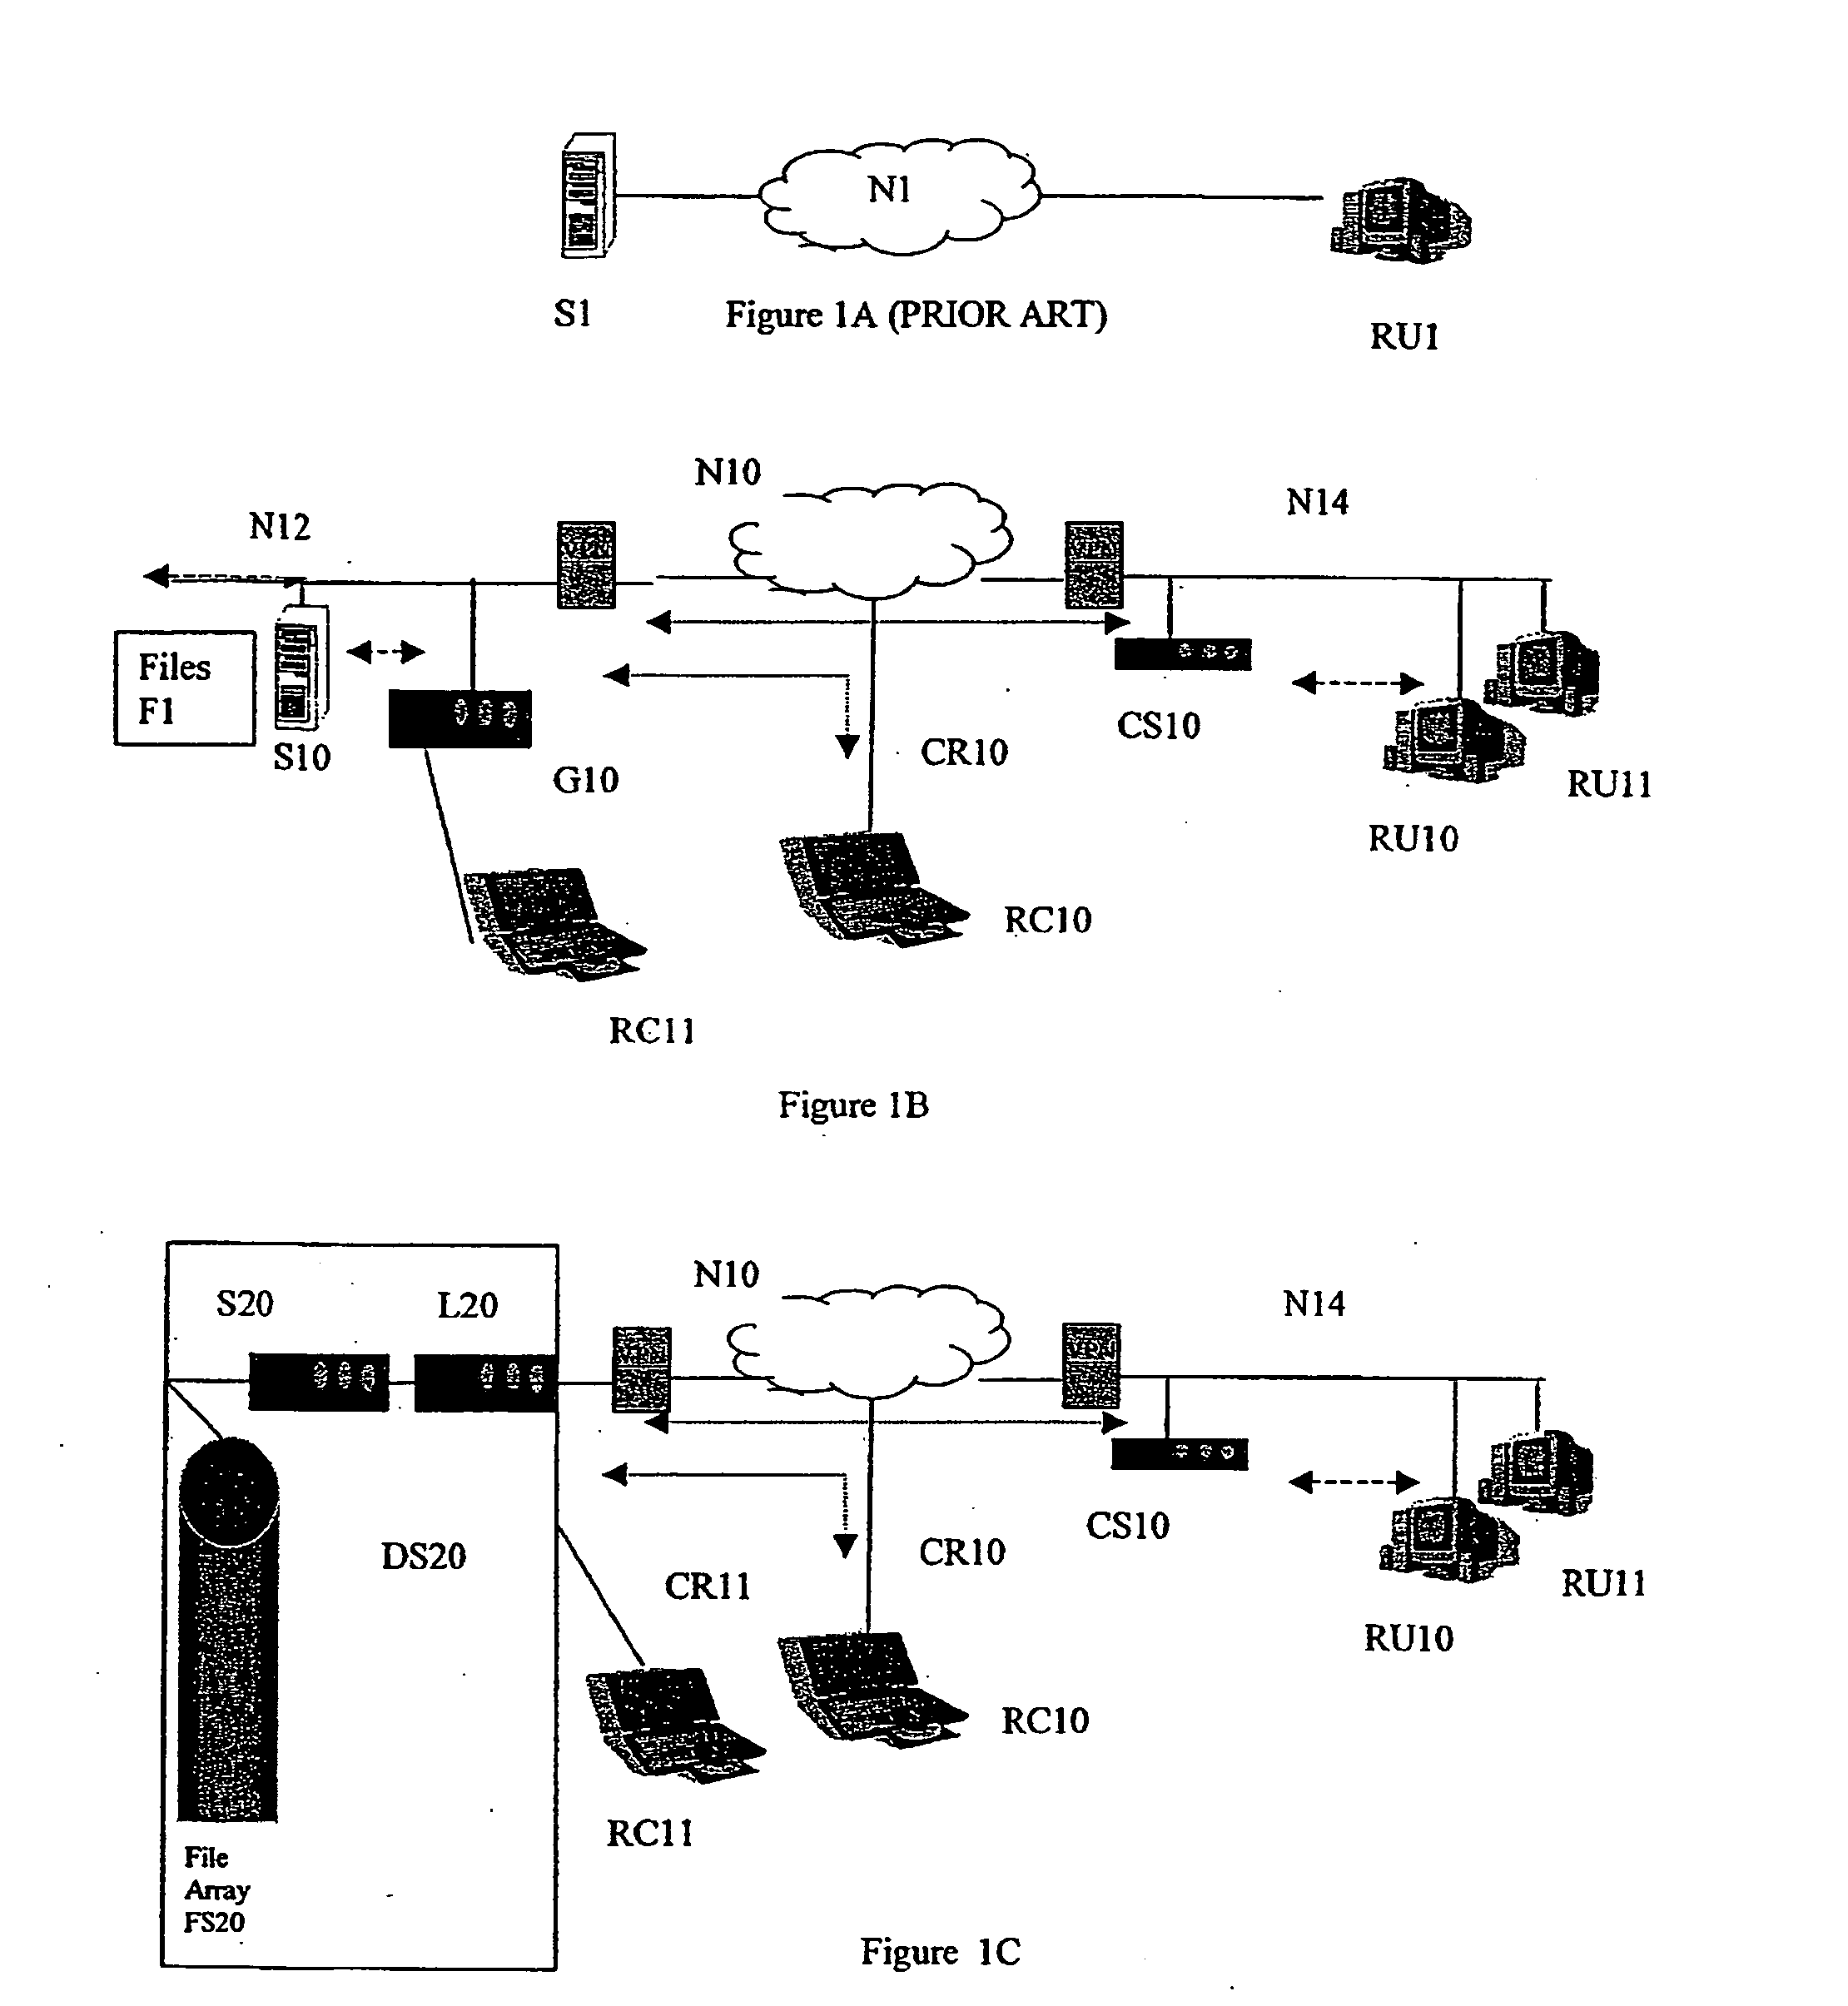 Method and system for differential distributed data file storage, management and access